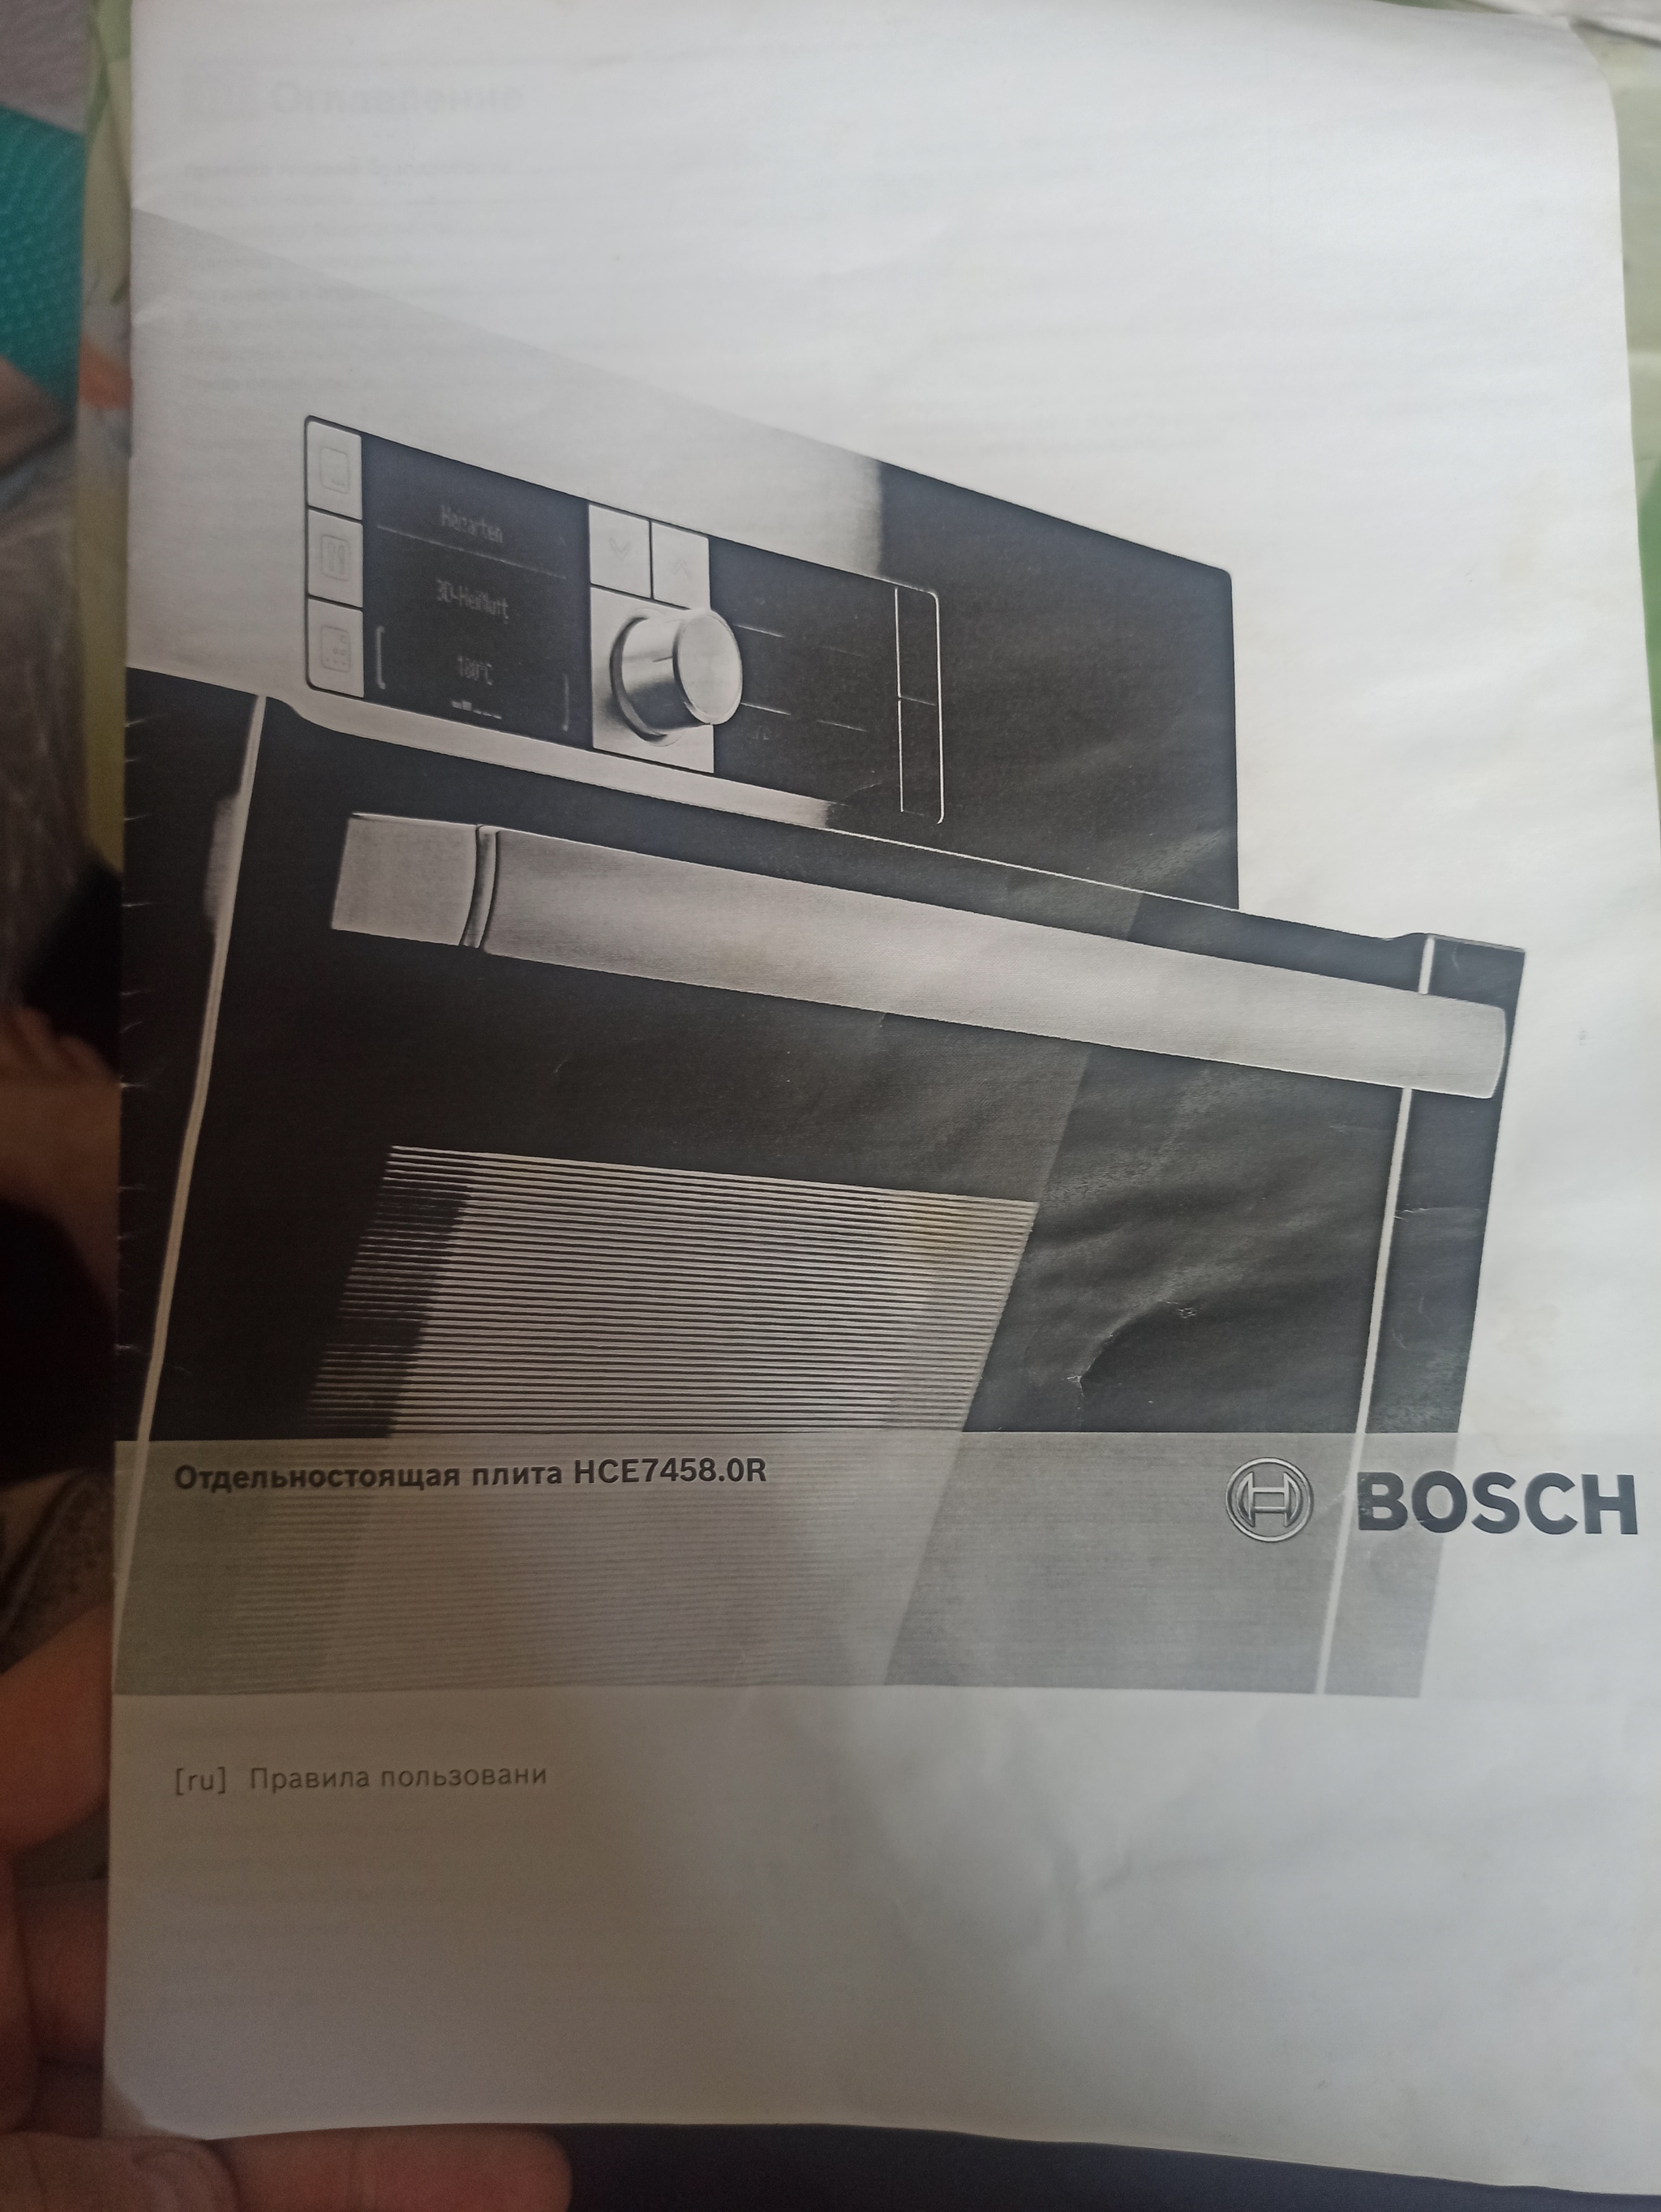 Can anyone tell me where to buy spare parts for a Bosch stove? - My, Bosch, Repair of equipment, Gas stove, Spare parts, Help me find, Need help with repair